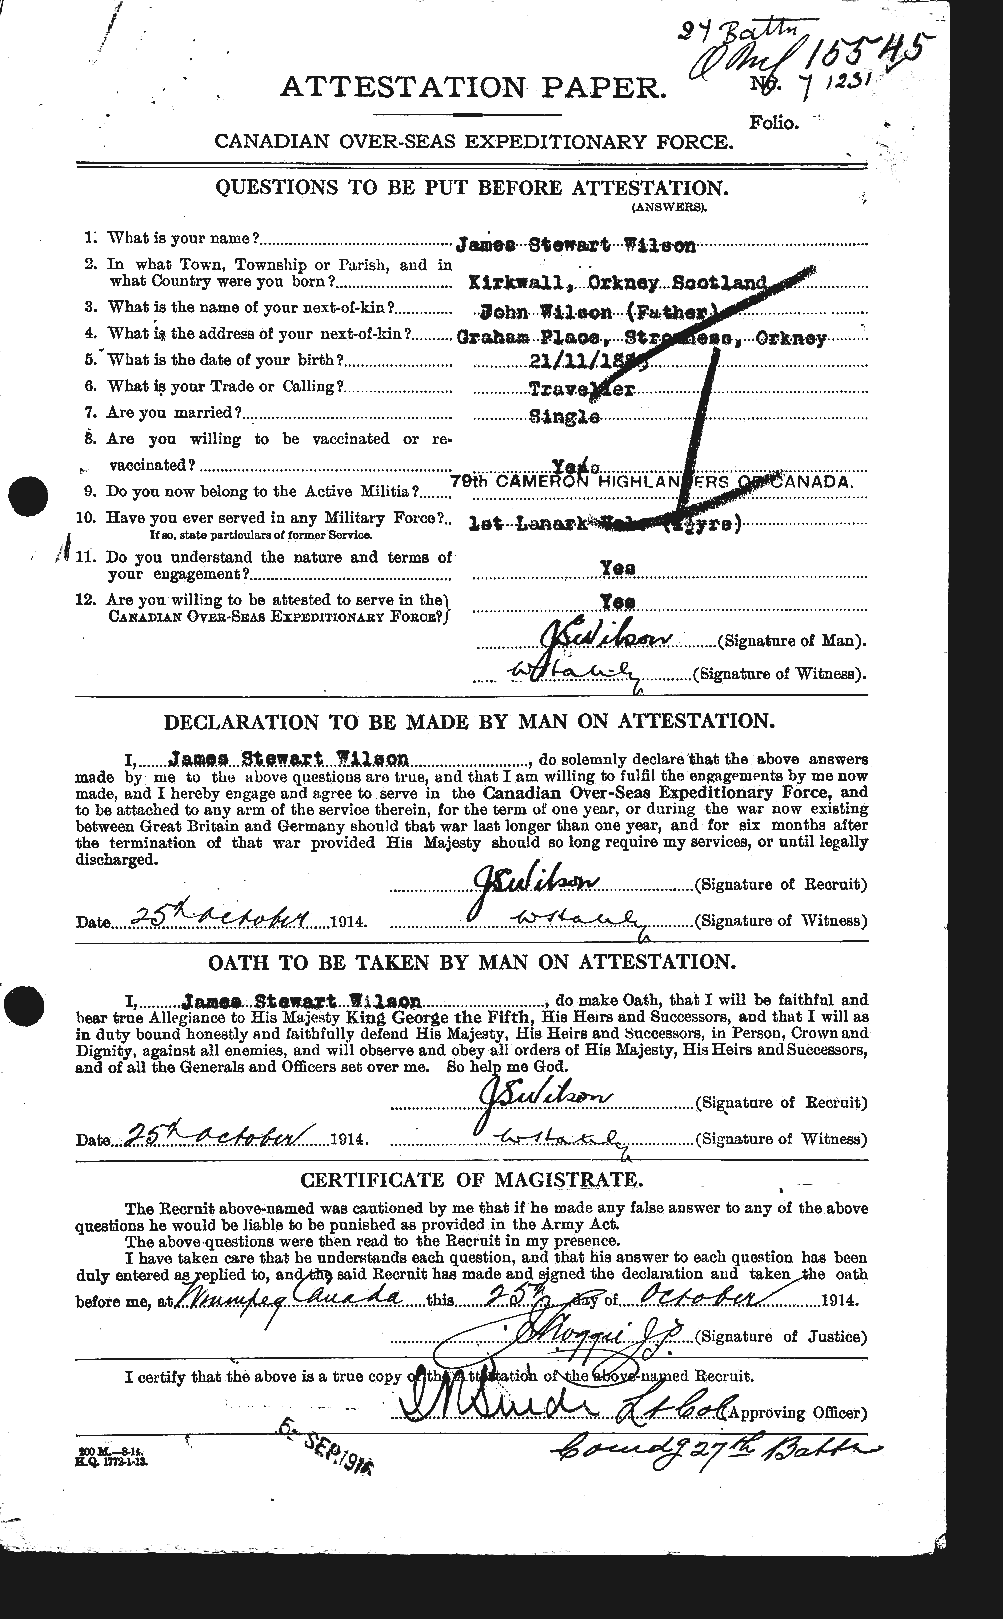 Personnel Records of the First World War - CEF 681499a